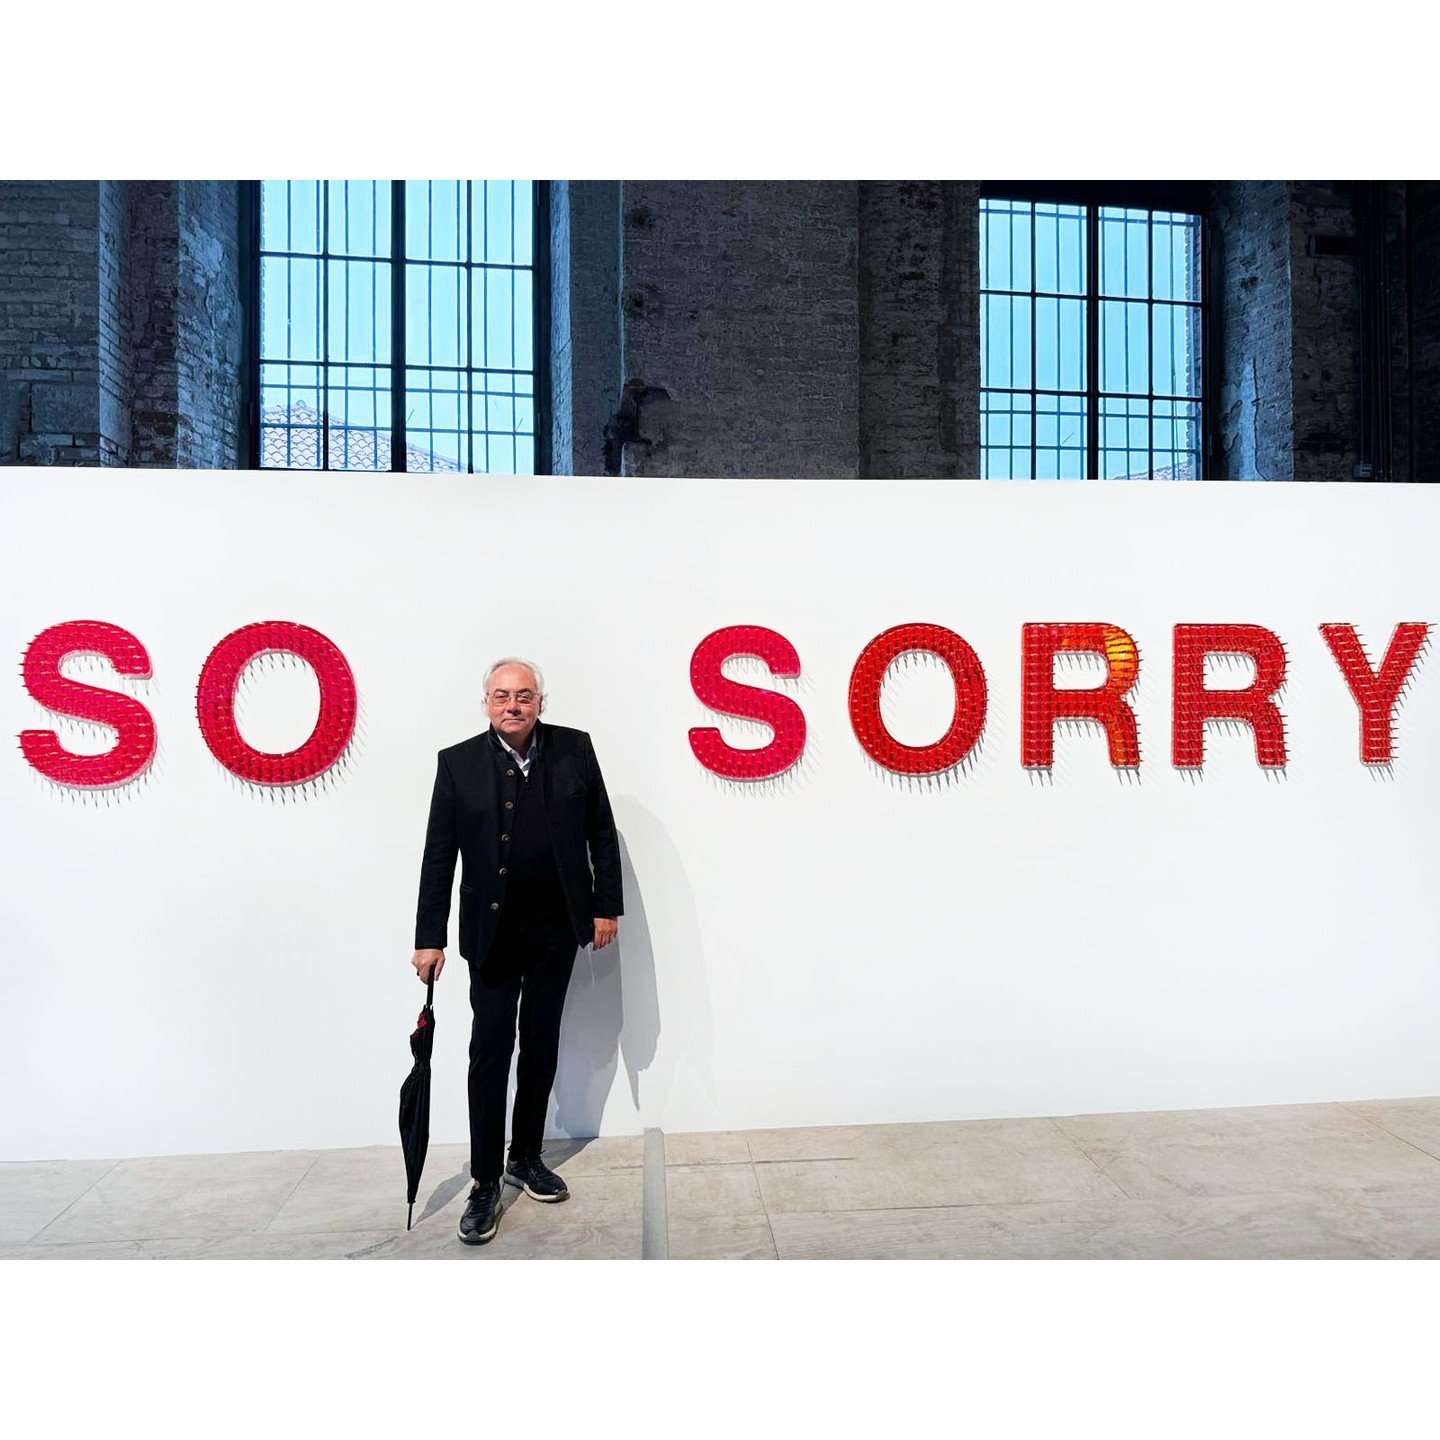 Gallery owner Ted Vassilev in Venice for the Biennale with #DTR artist #SabineWiedenhofer!

Her large scale installation 'Alea lacta Est' at the Arsenale speaks against the current turmoil of our world. She asks the audience to pause and reflect on t